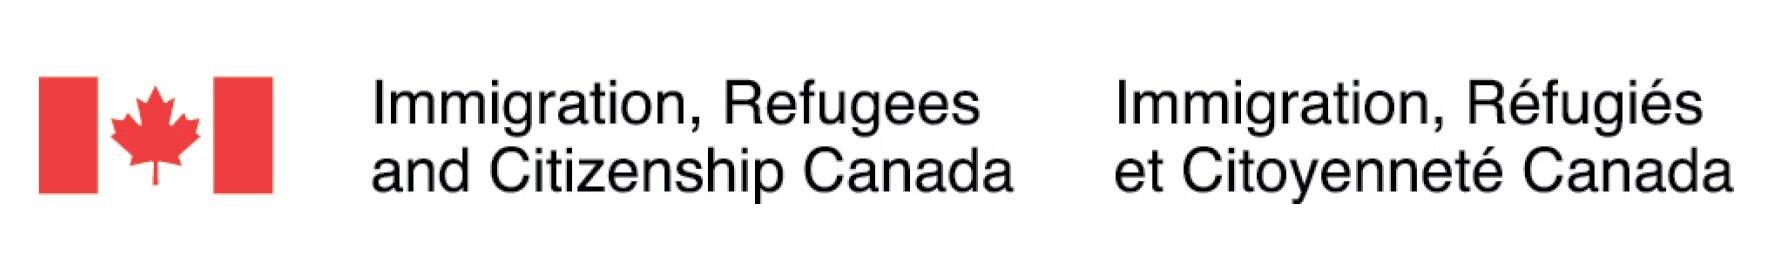 Immigration, Refugees, and Citizenship Canada: YMCA of Greater Vancouver funder